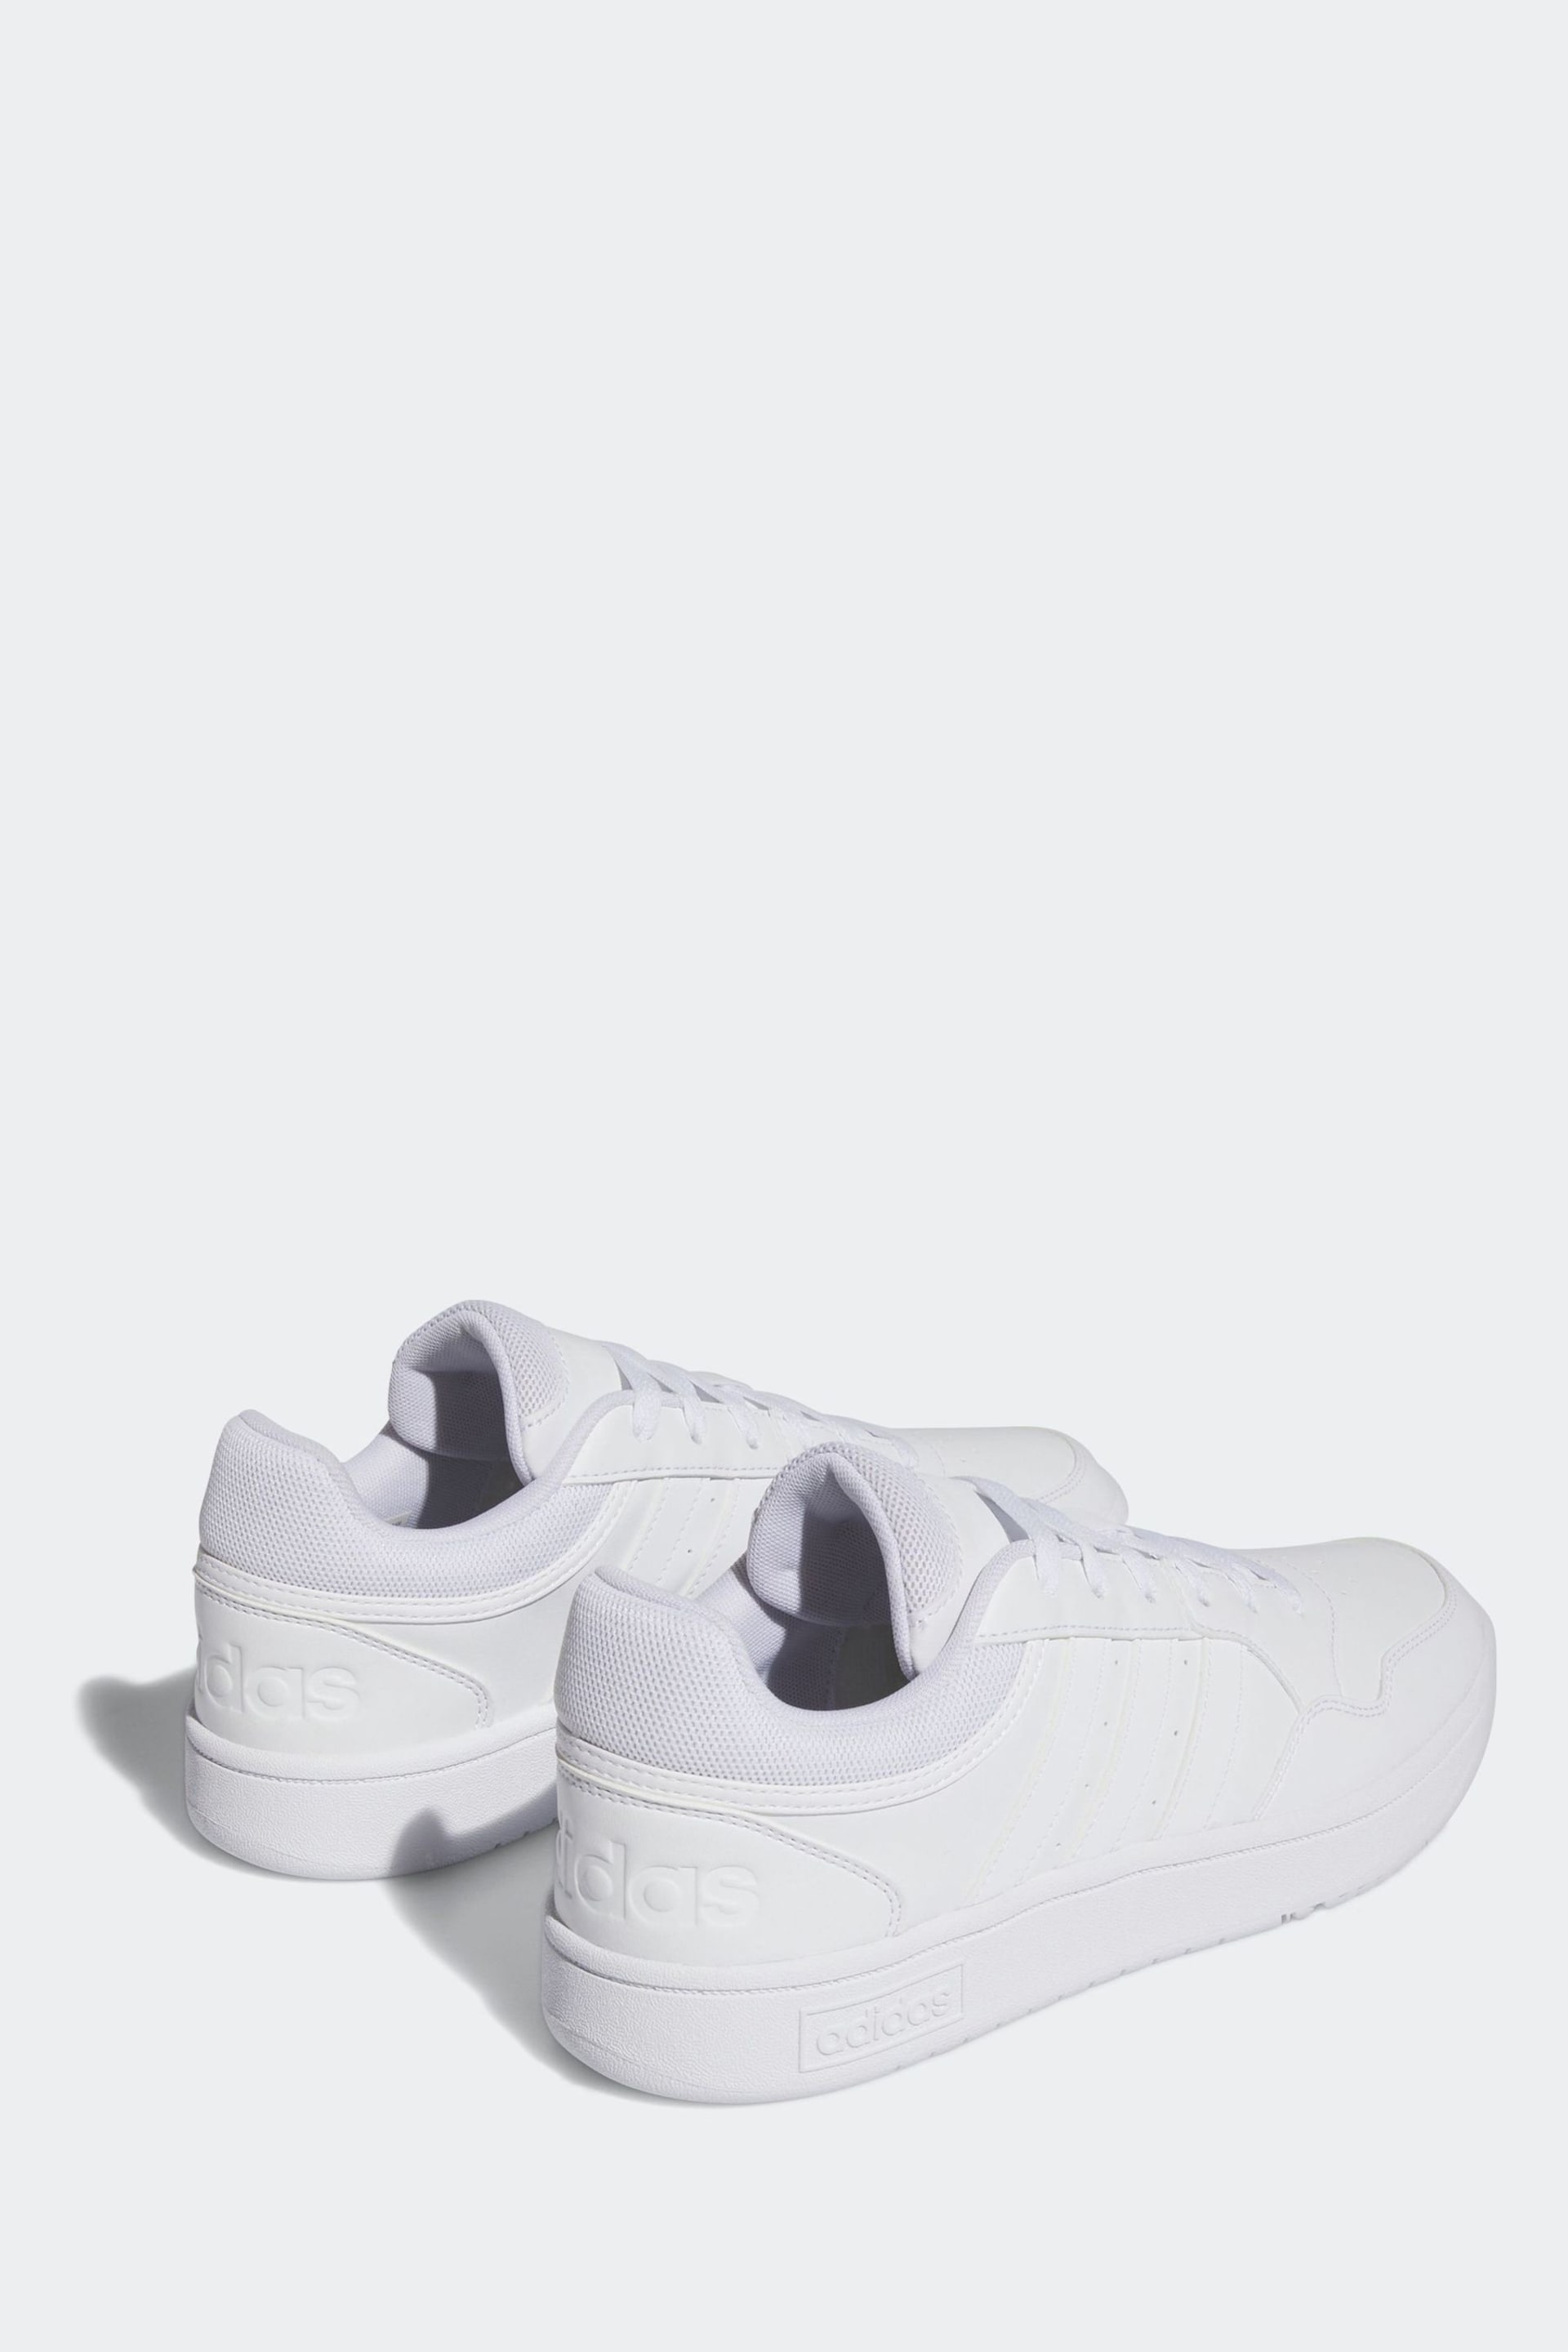 adidas White Originals Hoops 3.0 Low Classic Vintage Trainers - Image 4 of 9